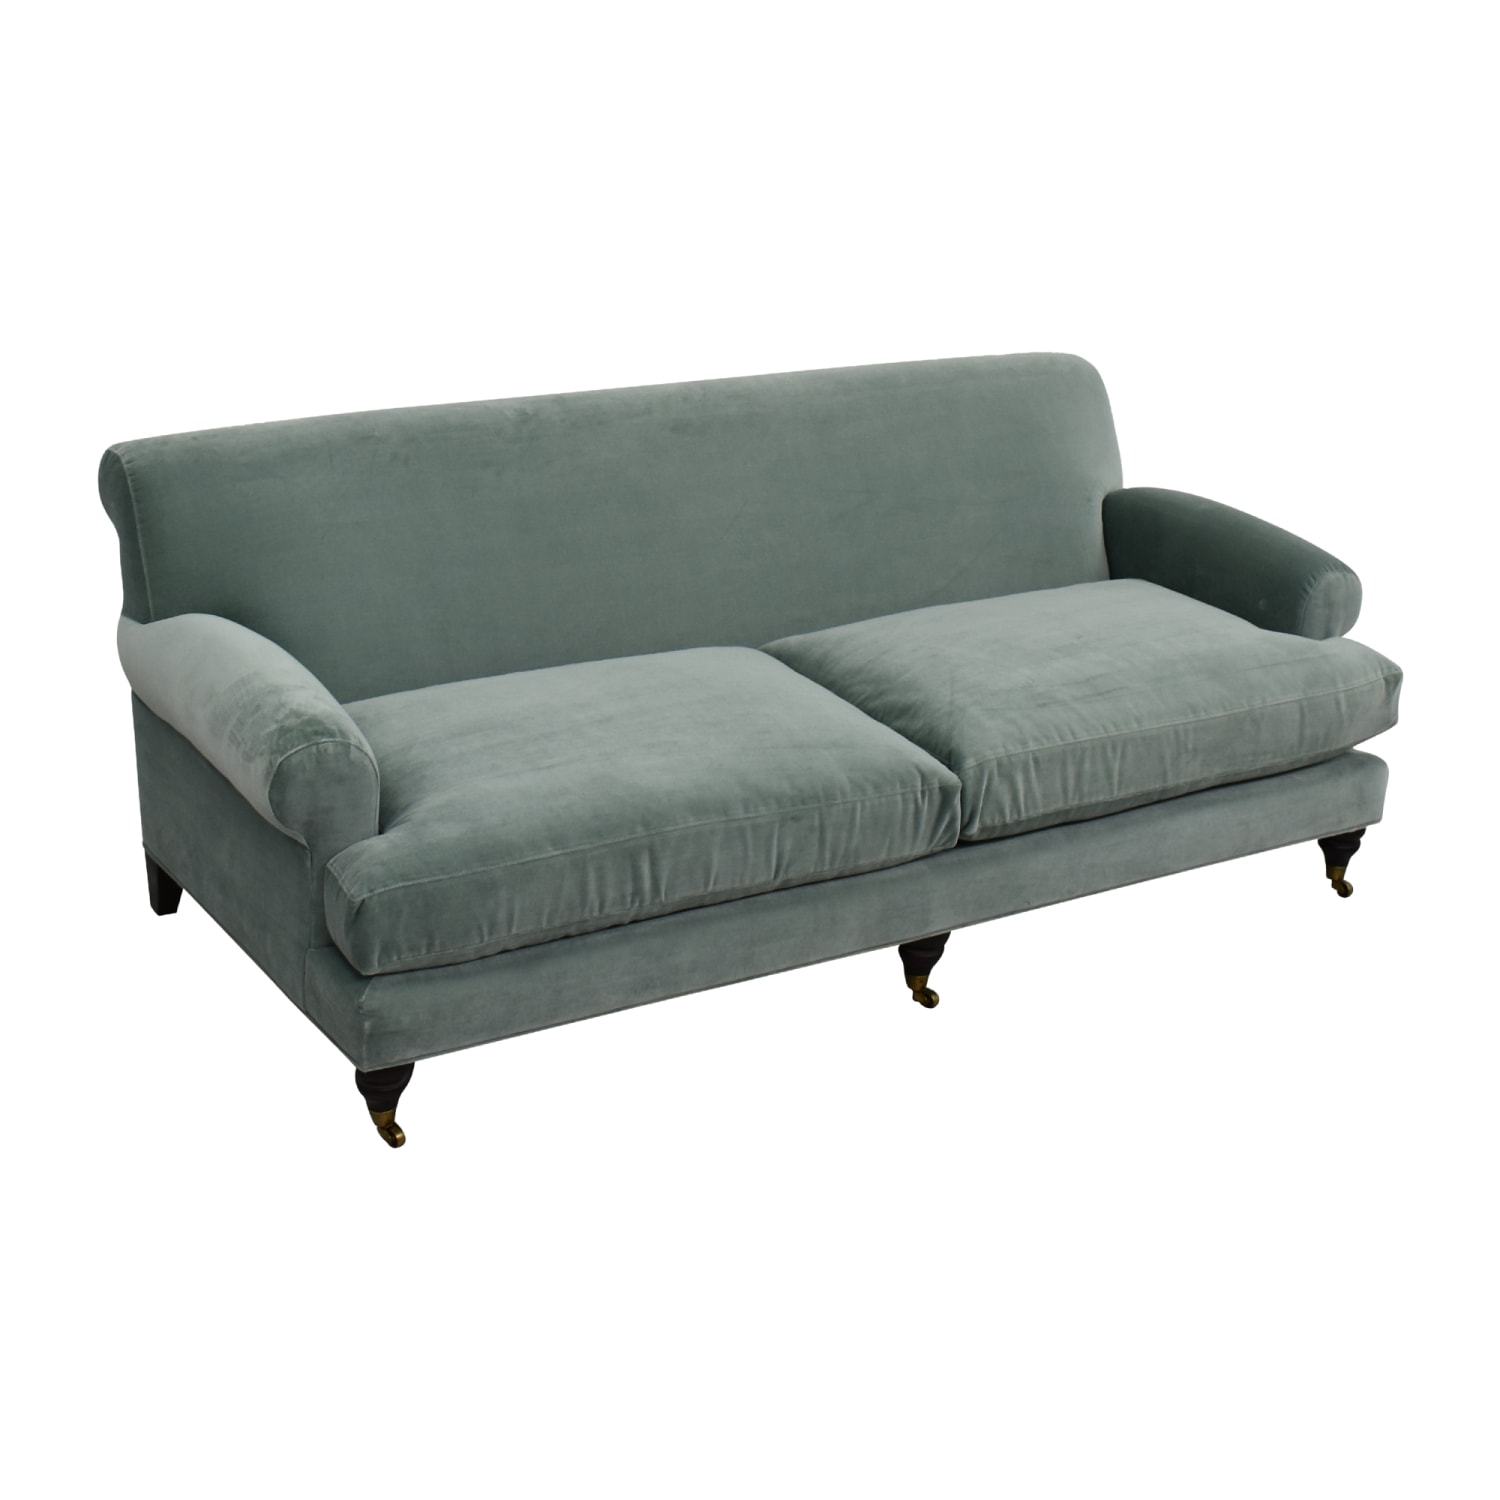 Willoughby Two-Cushion Sofa by Anthropologie